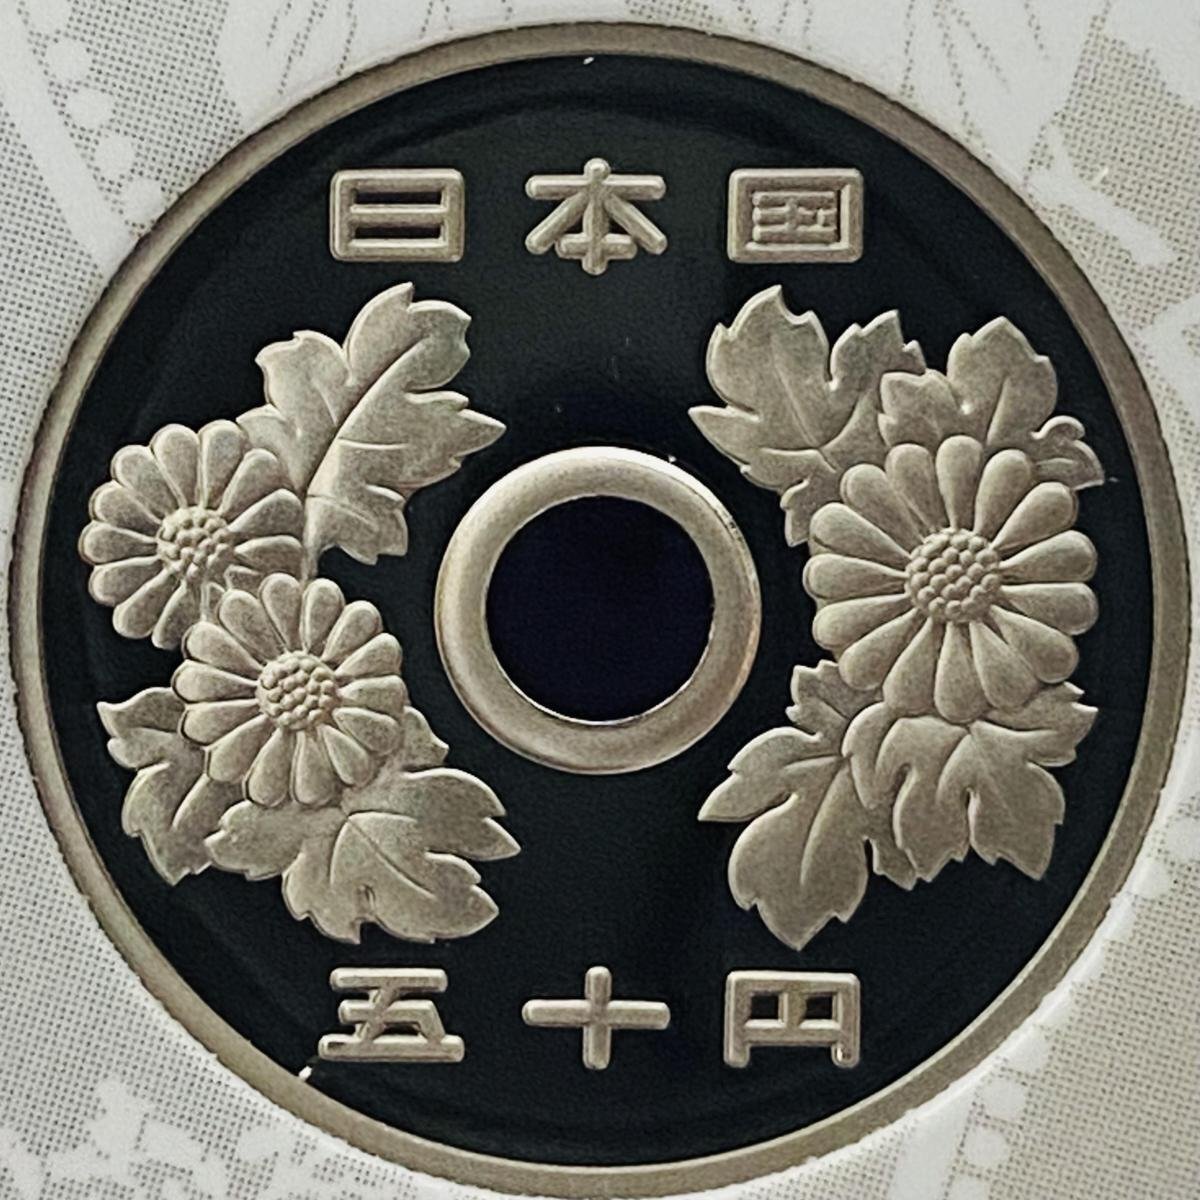 1 jpy ~ 5 100 jpy money birth 30 anniversary 2012 year proof money set silver approximately 20g commemorative coin precious metal medal structure . department coin PT2012g